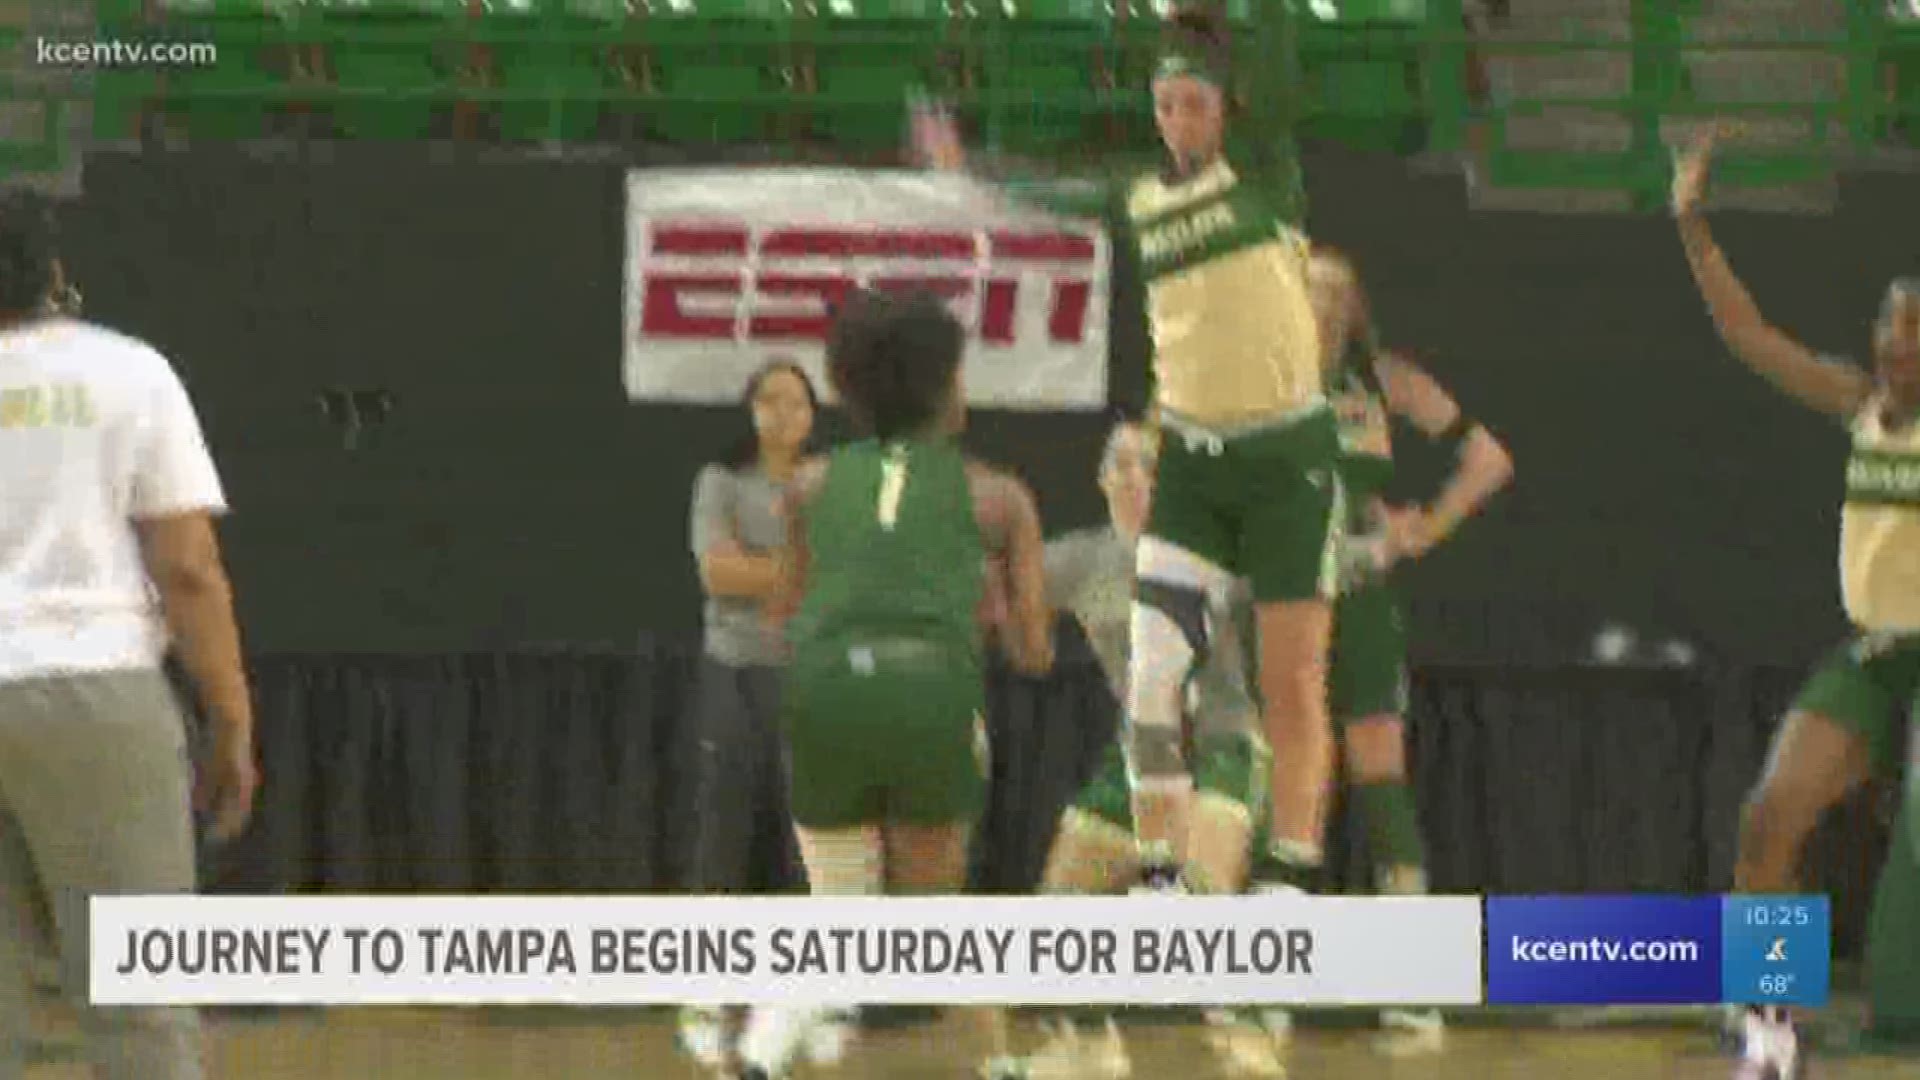 "Together to Tampa" has been the Lady Bears' motto all season, and Saturday's game against Abilene Christian University is a stepping stone to that goal.